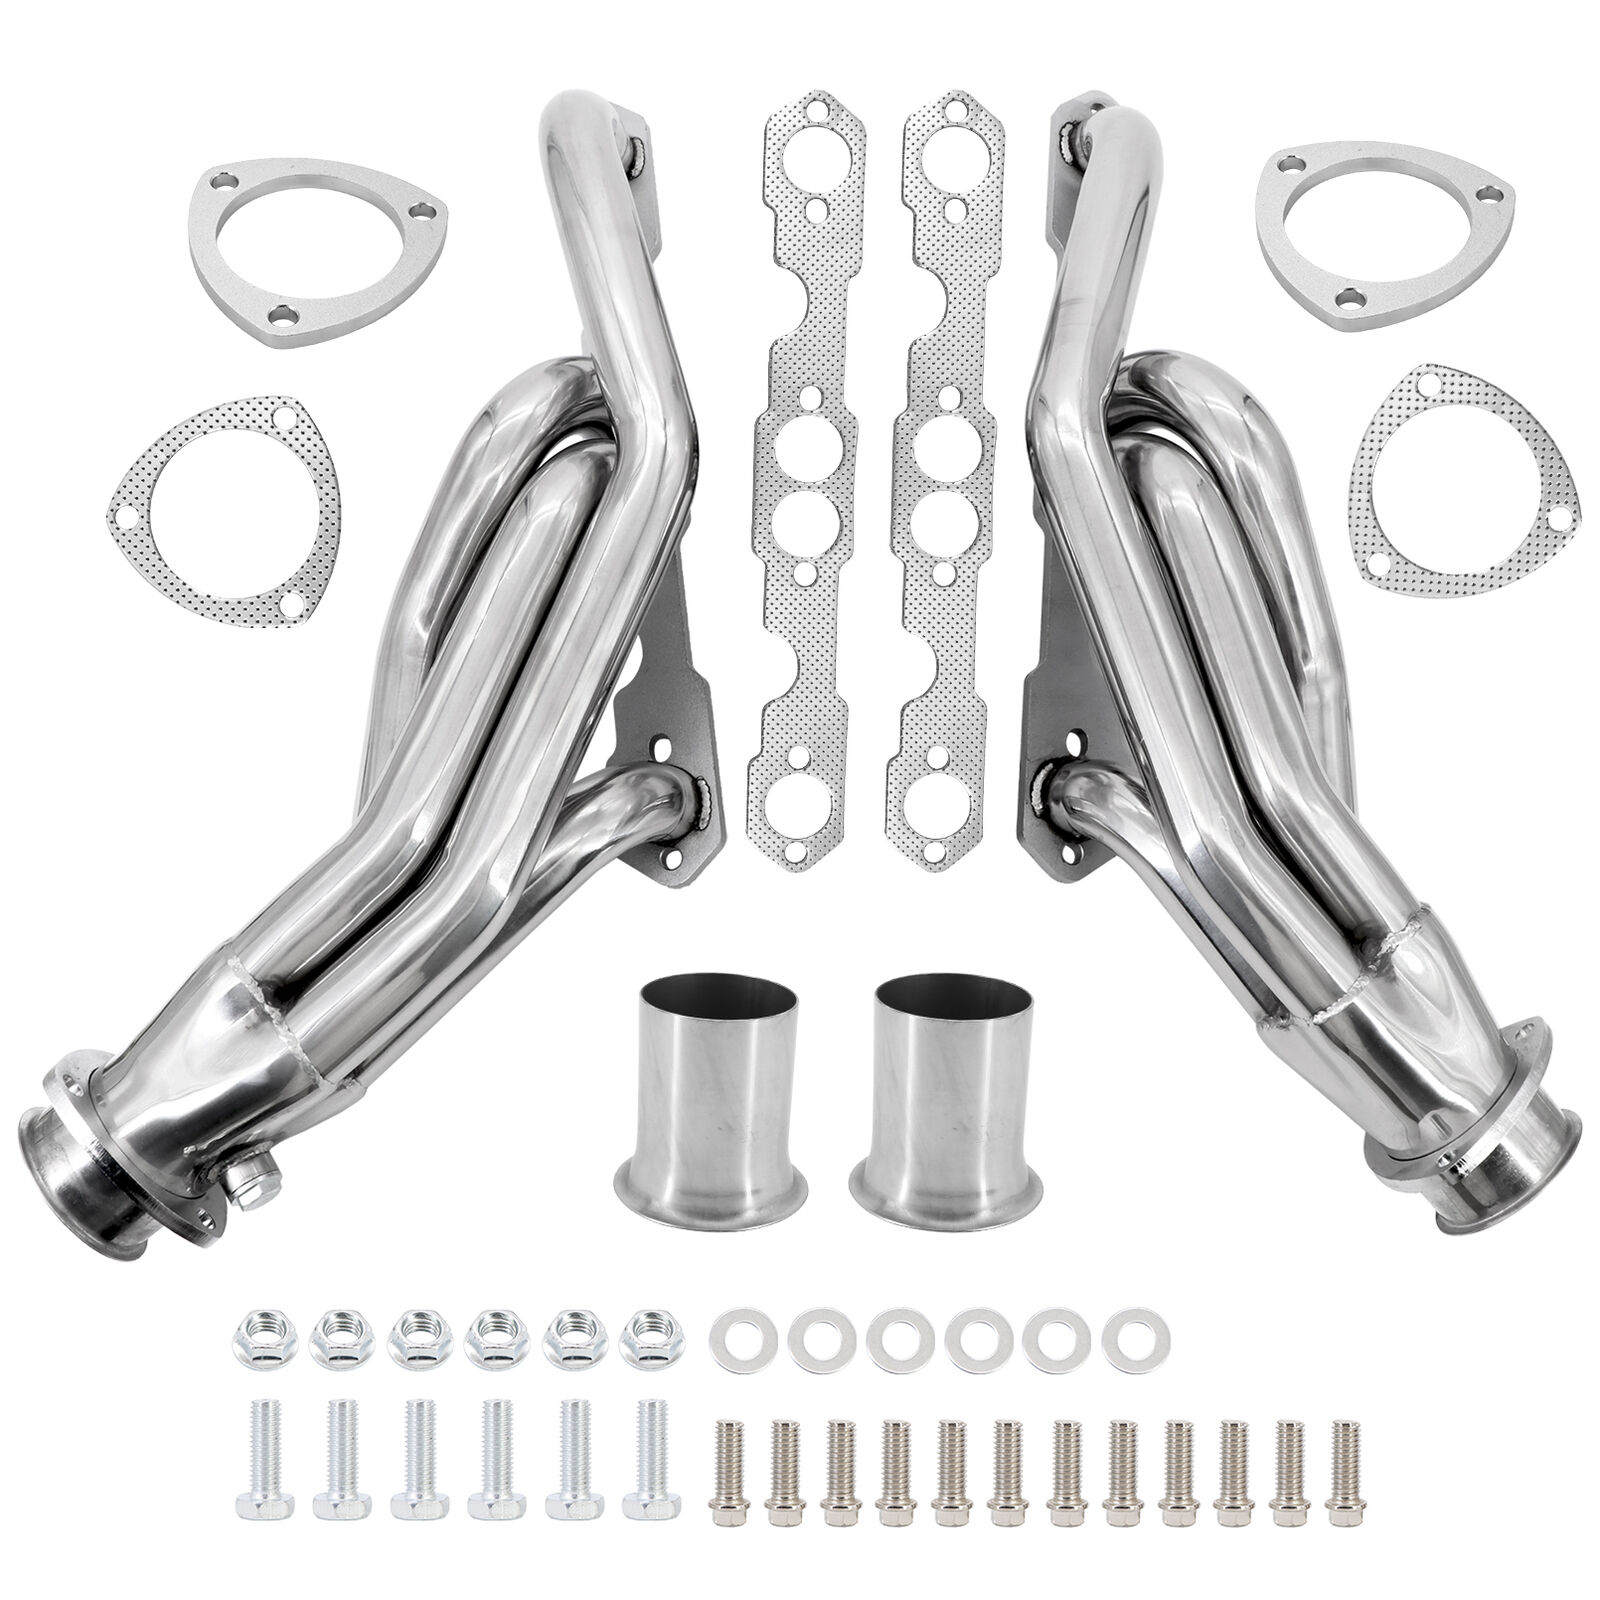 Stainless Steel Exhaust Header for 1988-1995 Small Block Chevy 350 Pickup Truck